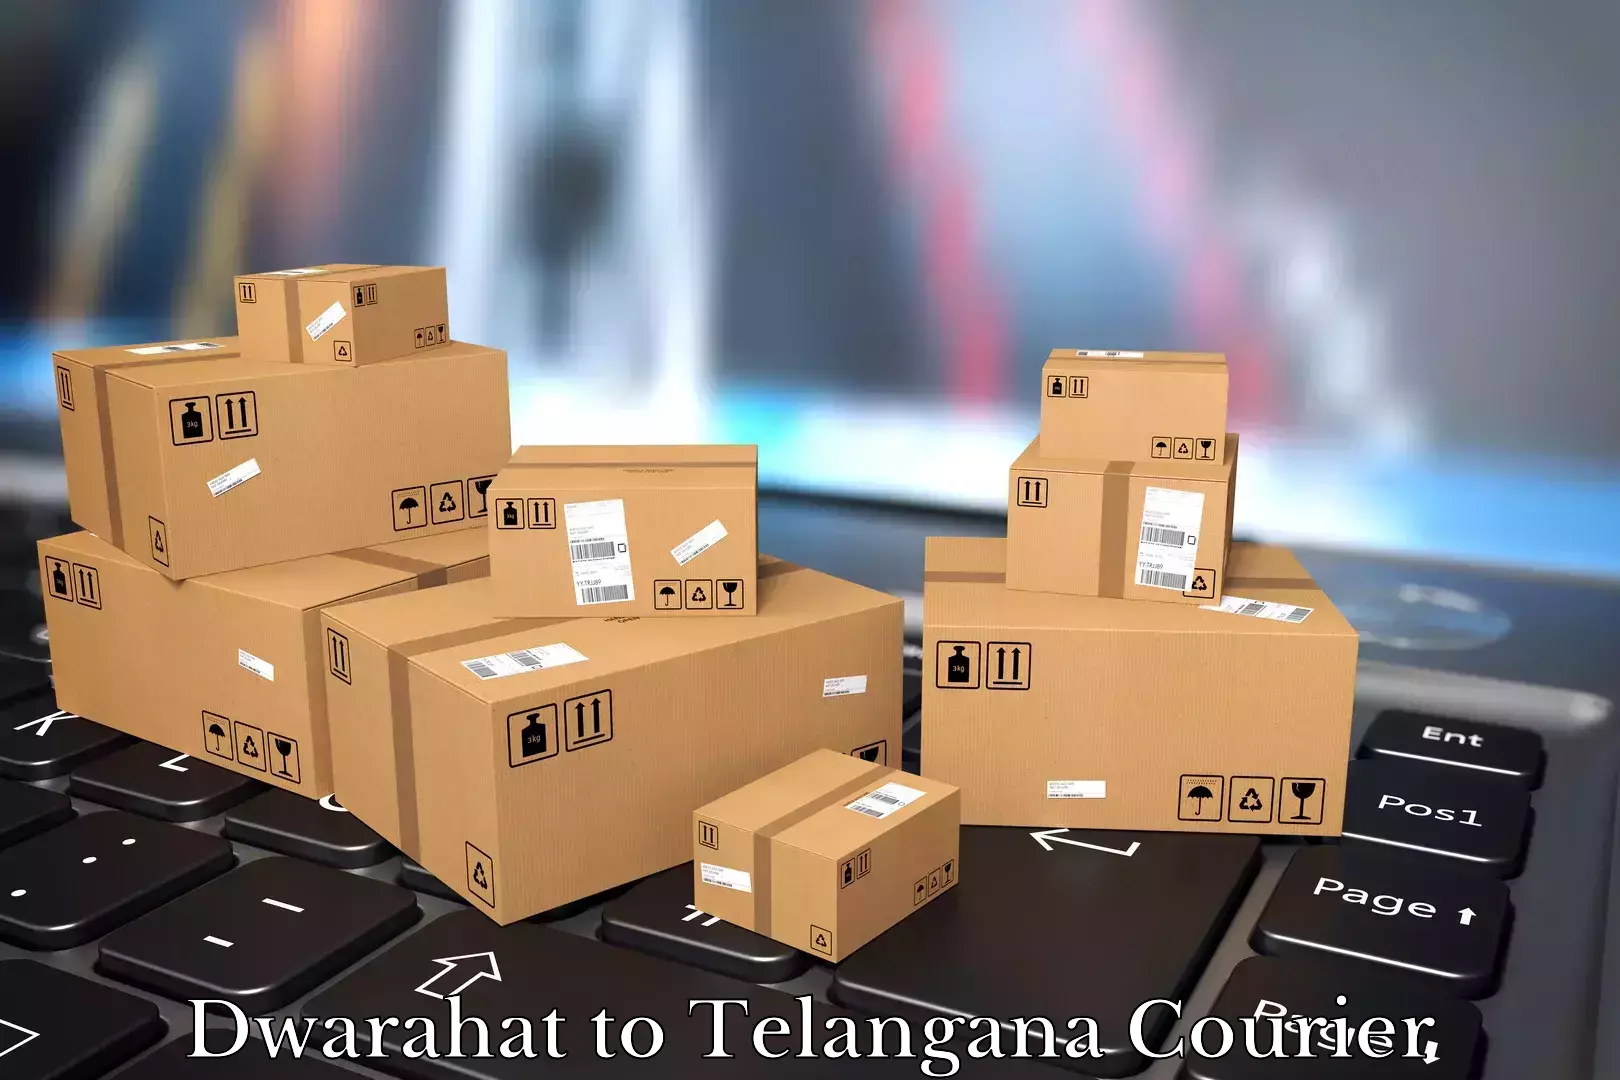 Efficient packing and moving Dwarahat to Secunderabad